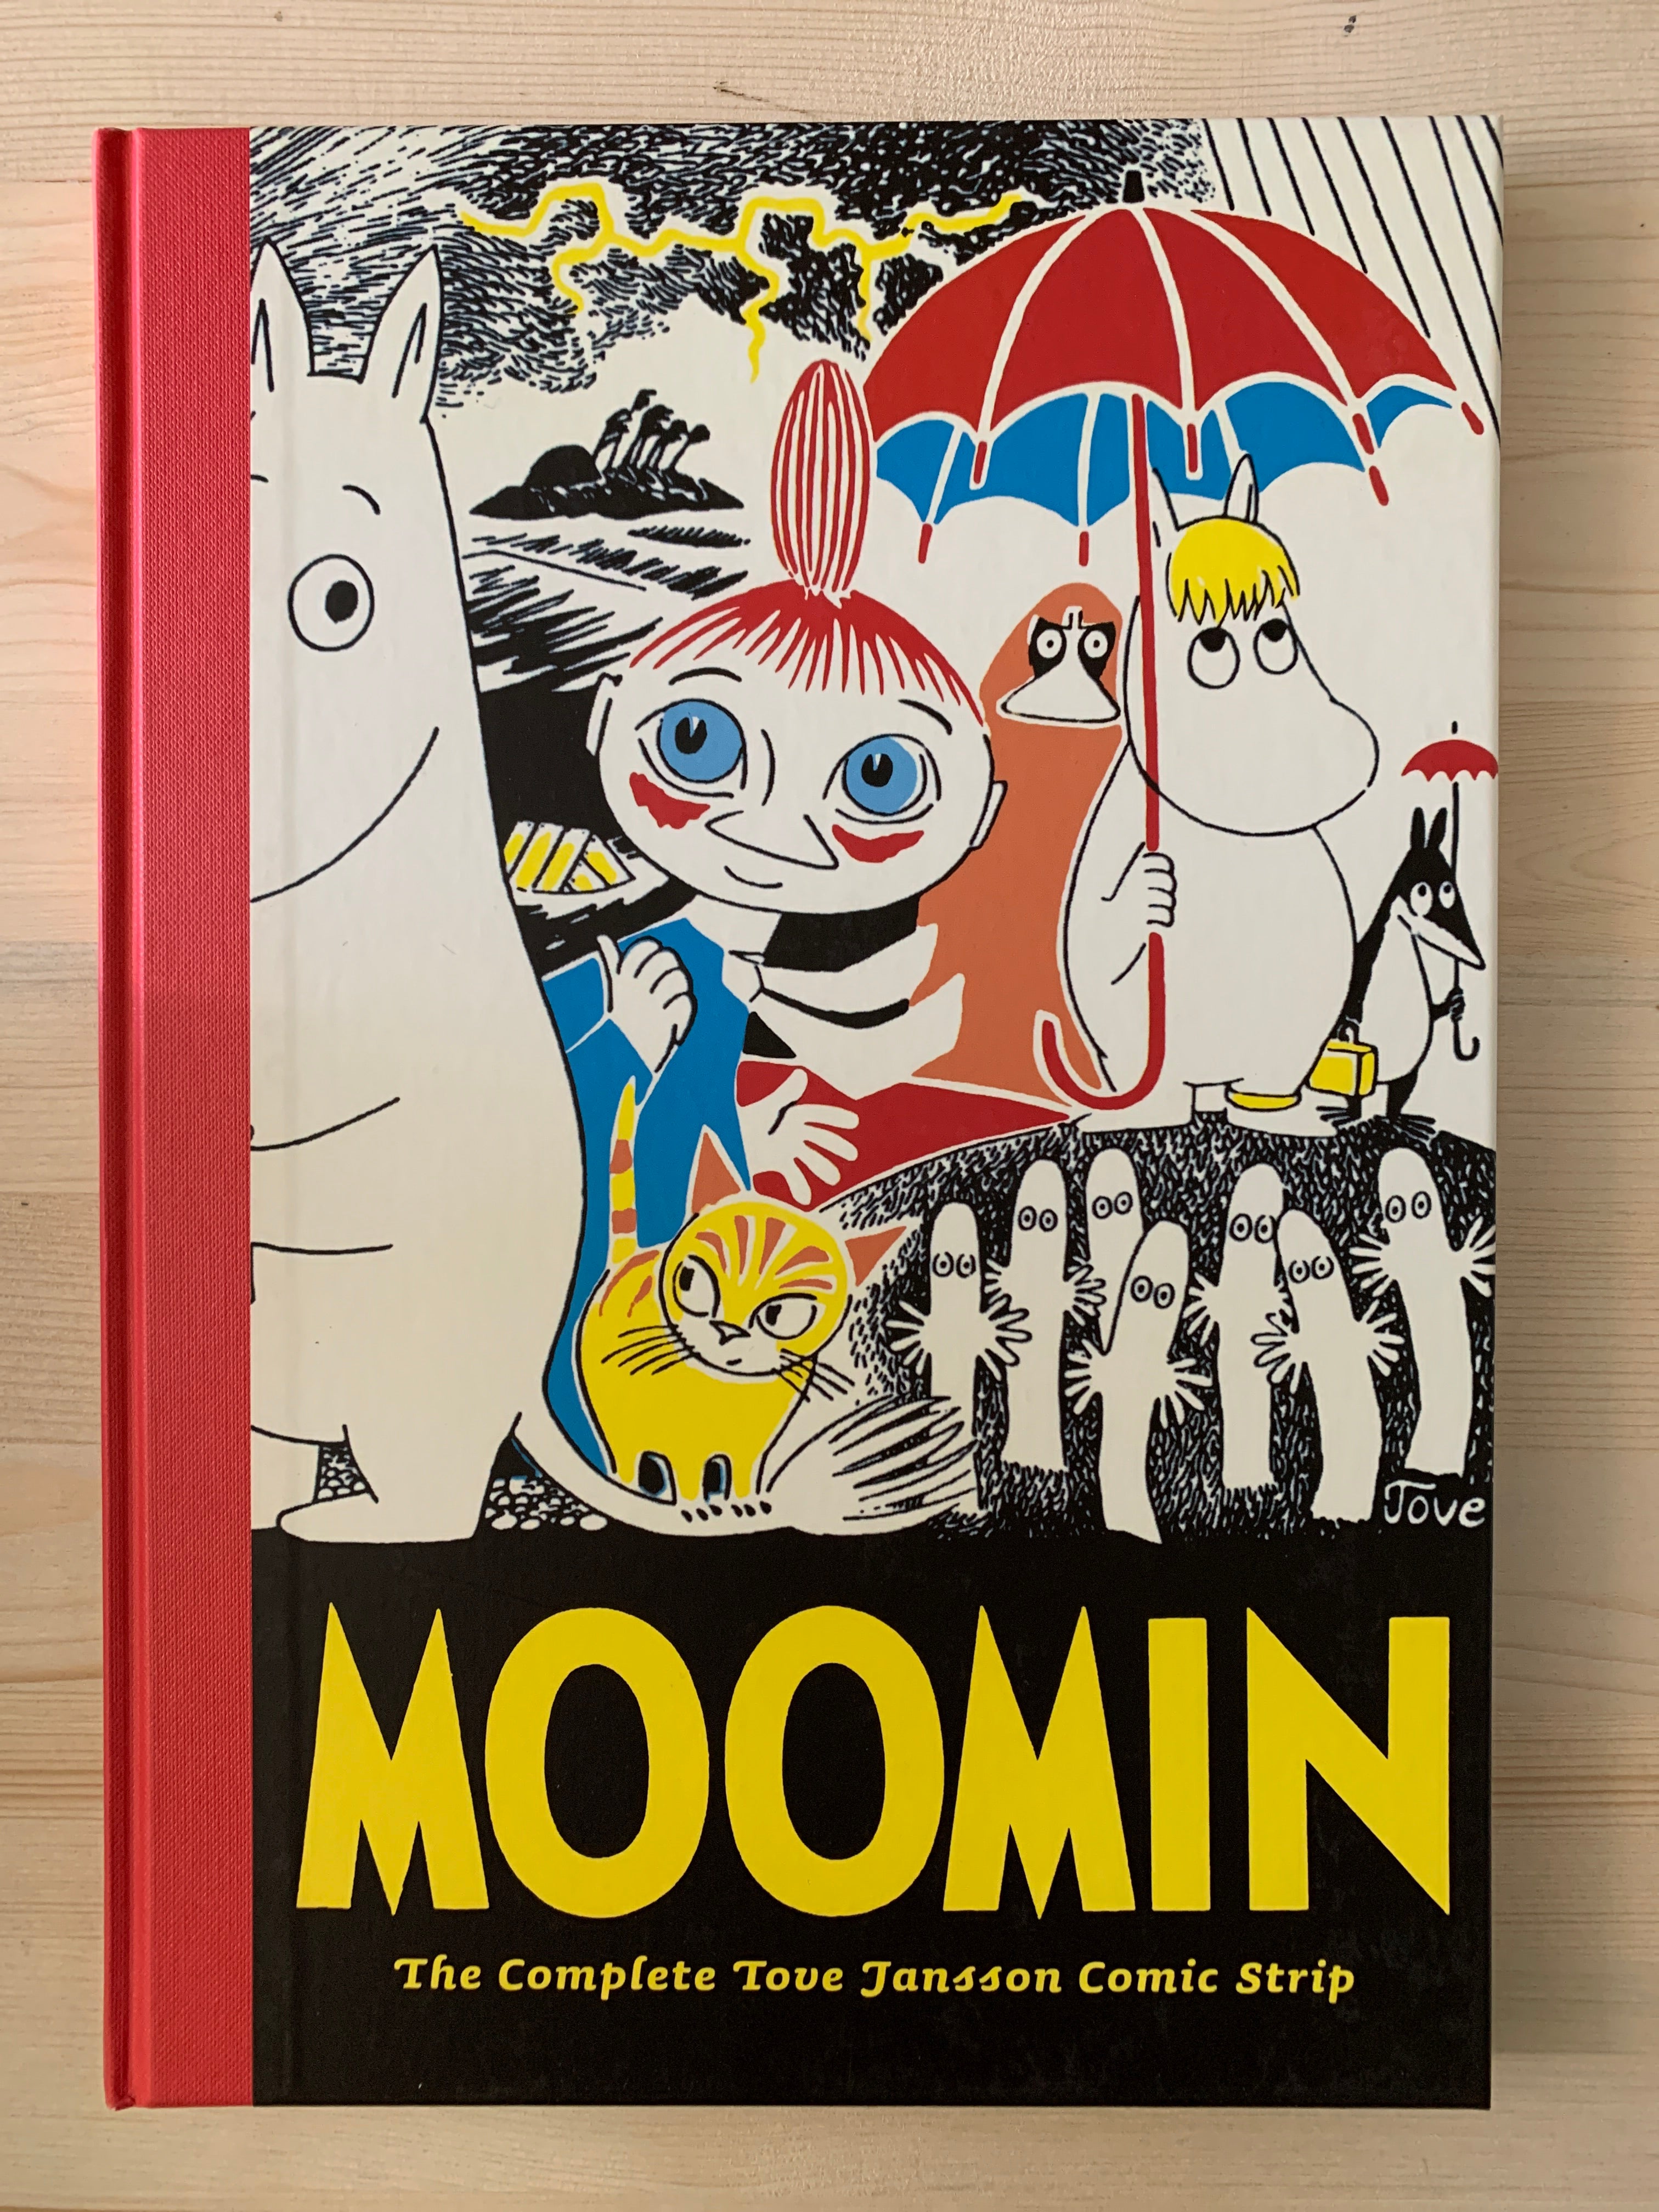 The　Lucky's　Complete　and　Jansson　Volume　Moomin:　Strip　Books　Tove　Comics　Comic　–